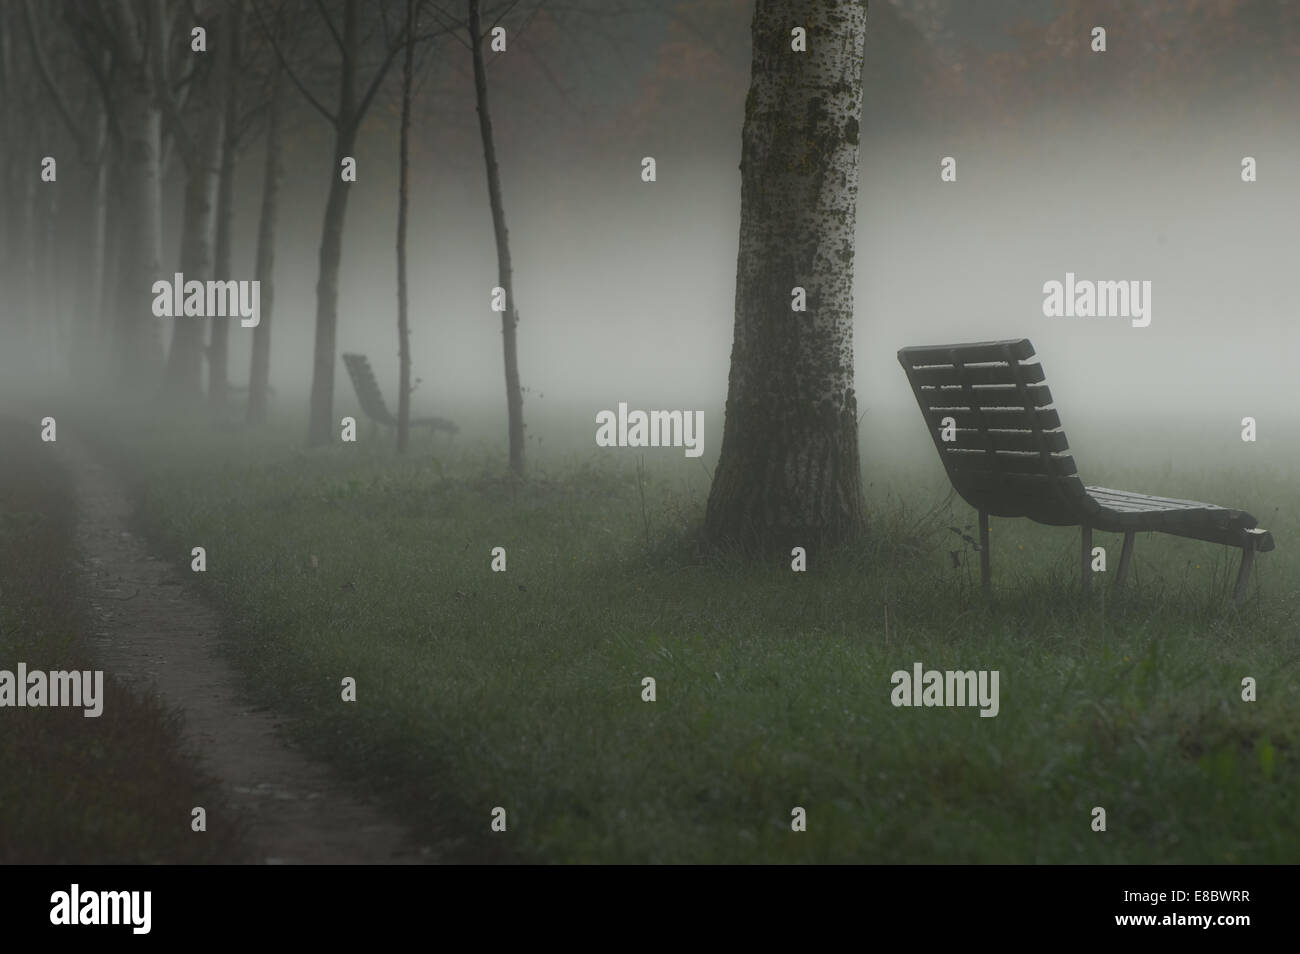 Mystic misty landscape (Trees and park benches along a path) Stock Photo